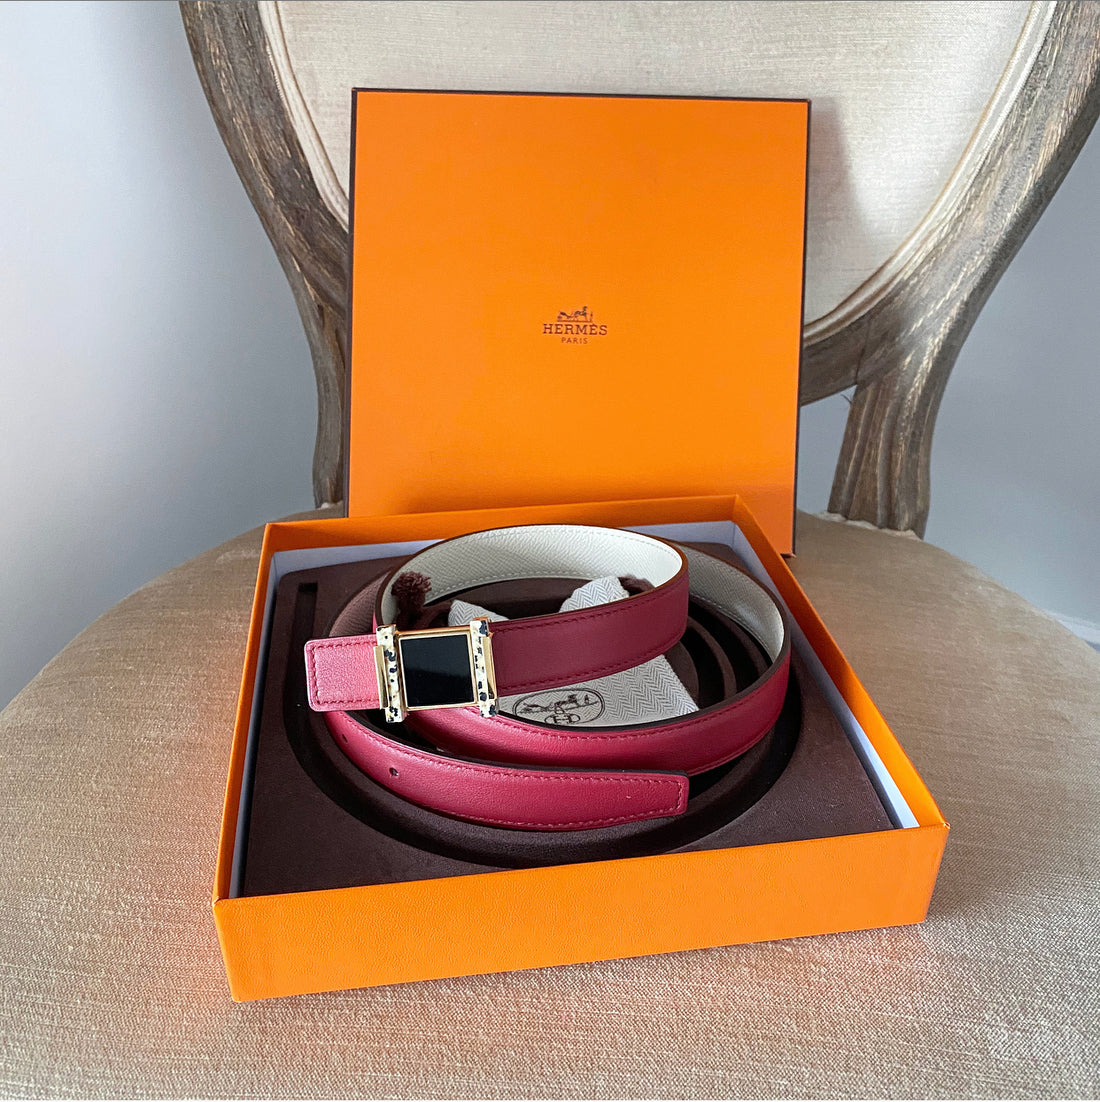 Hermes Red Limited Edition 2016 Runway 24mm Lacquer and Jasper Belt Kit